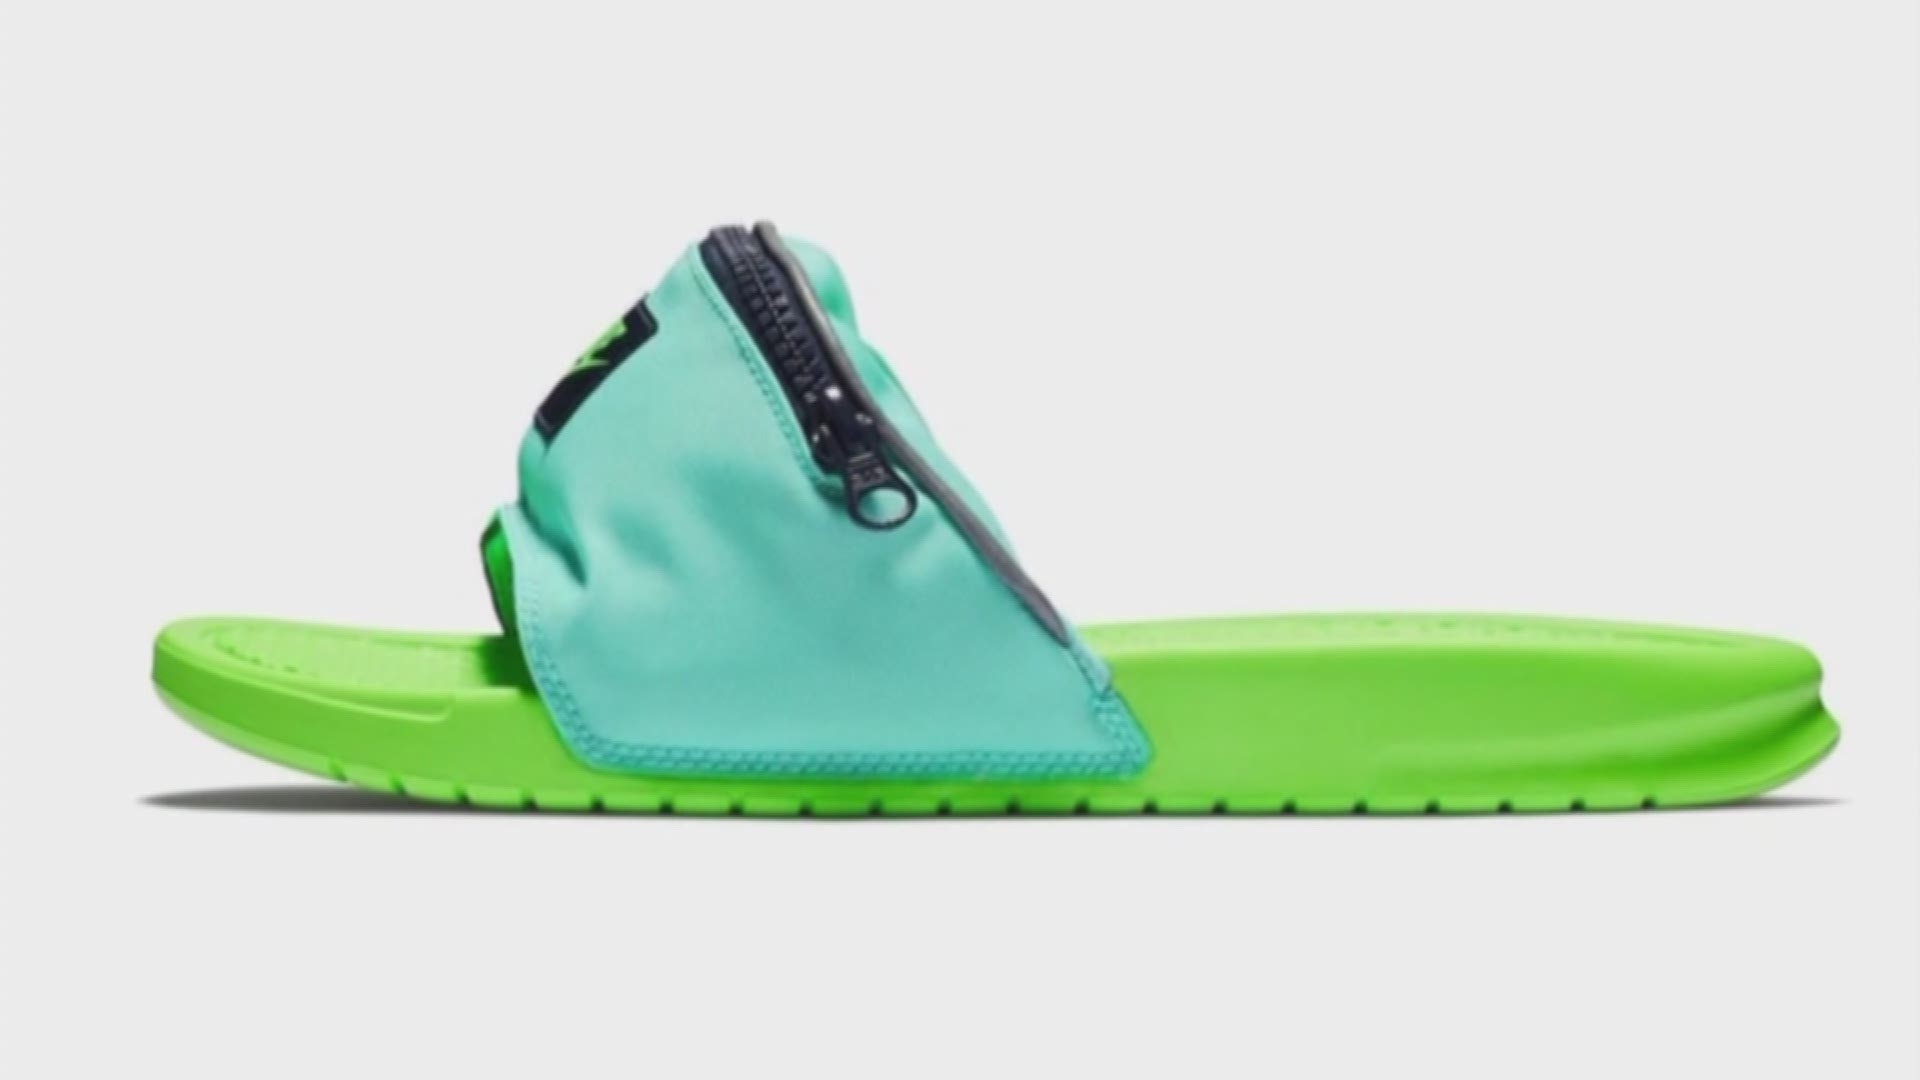 Nike's latest Benassi Slides have got you covered! The fanny pack flops are expected to be released this summer.